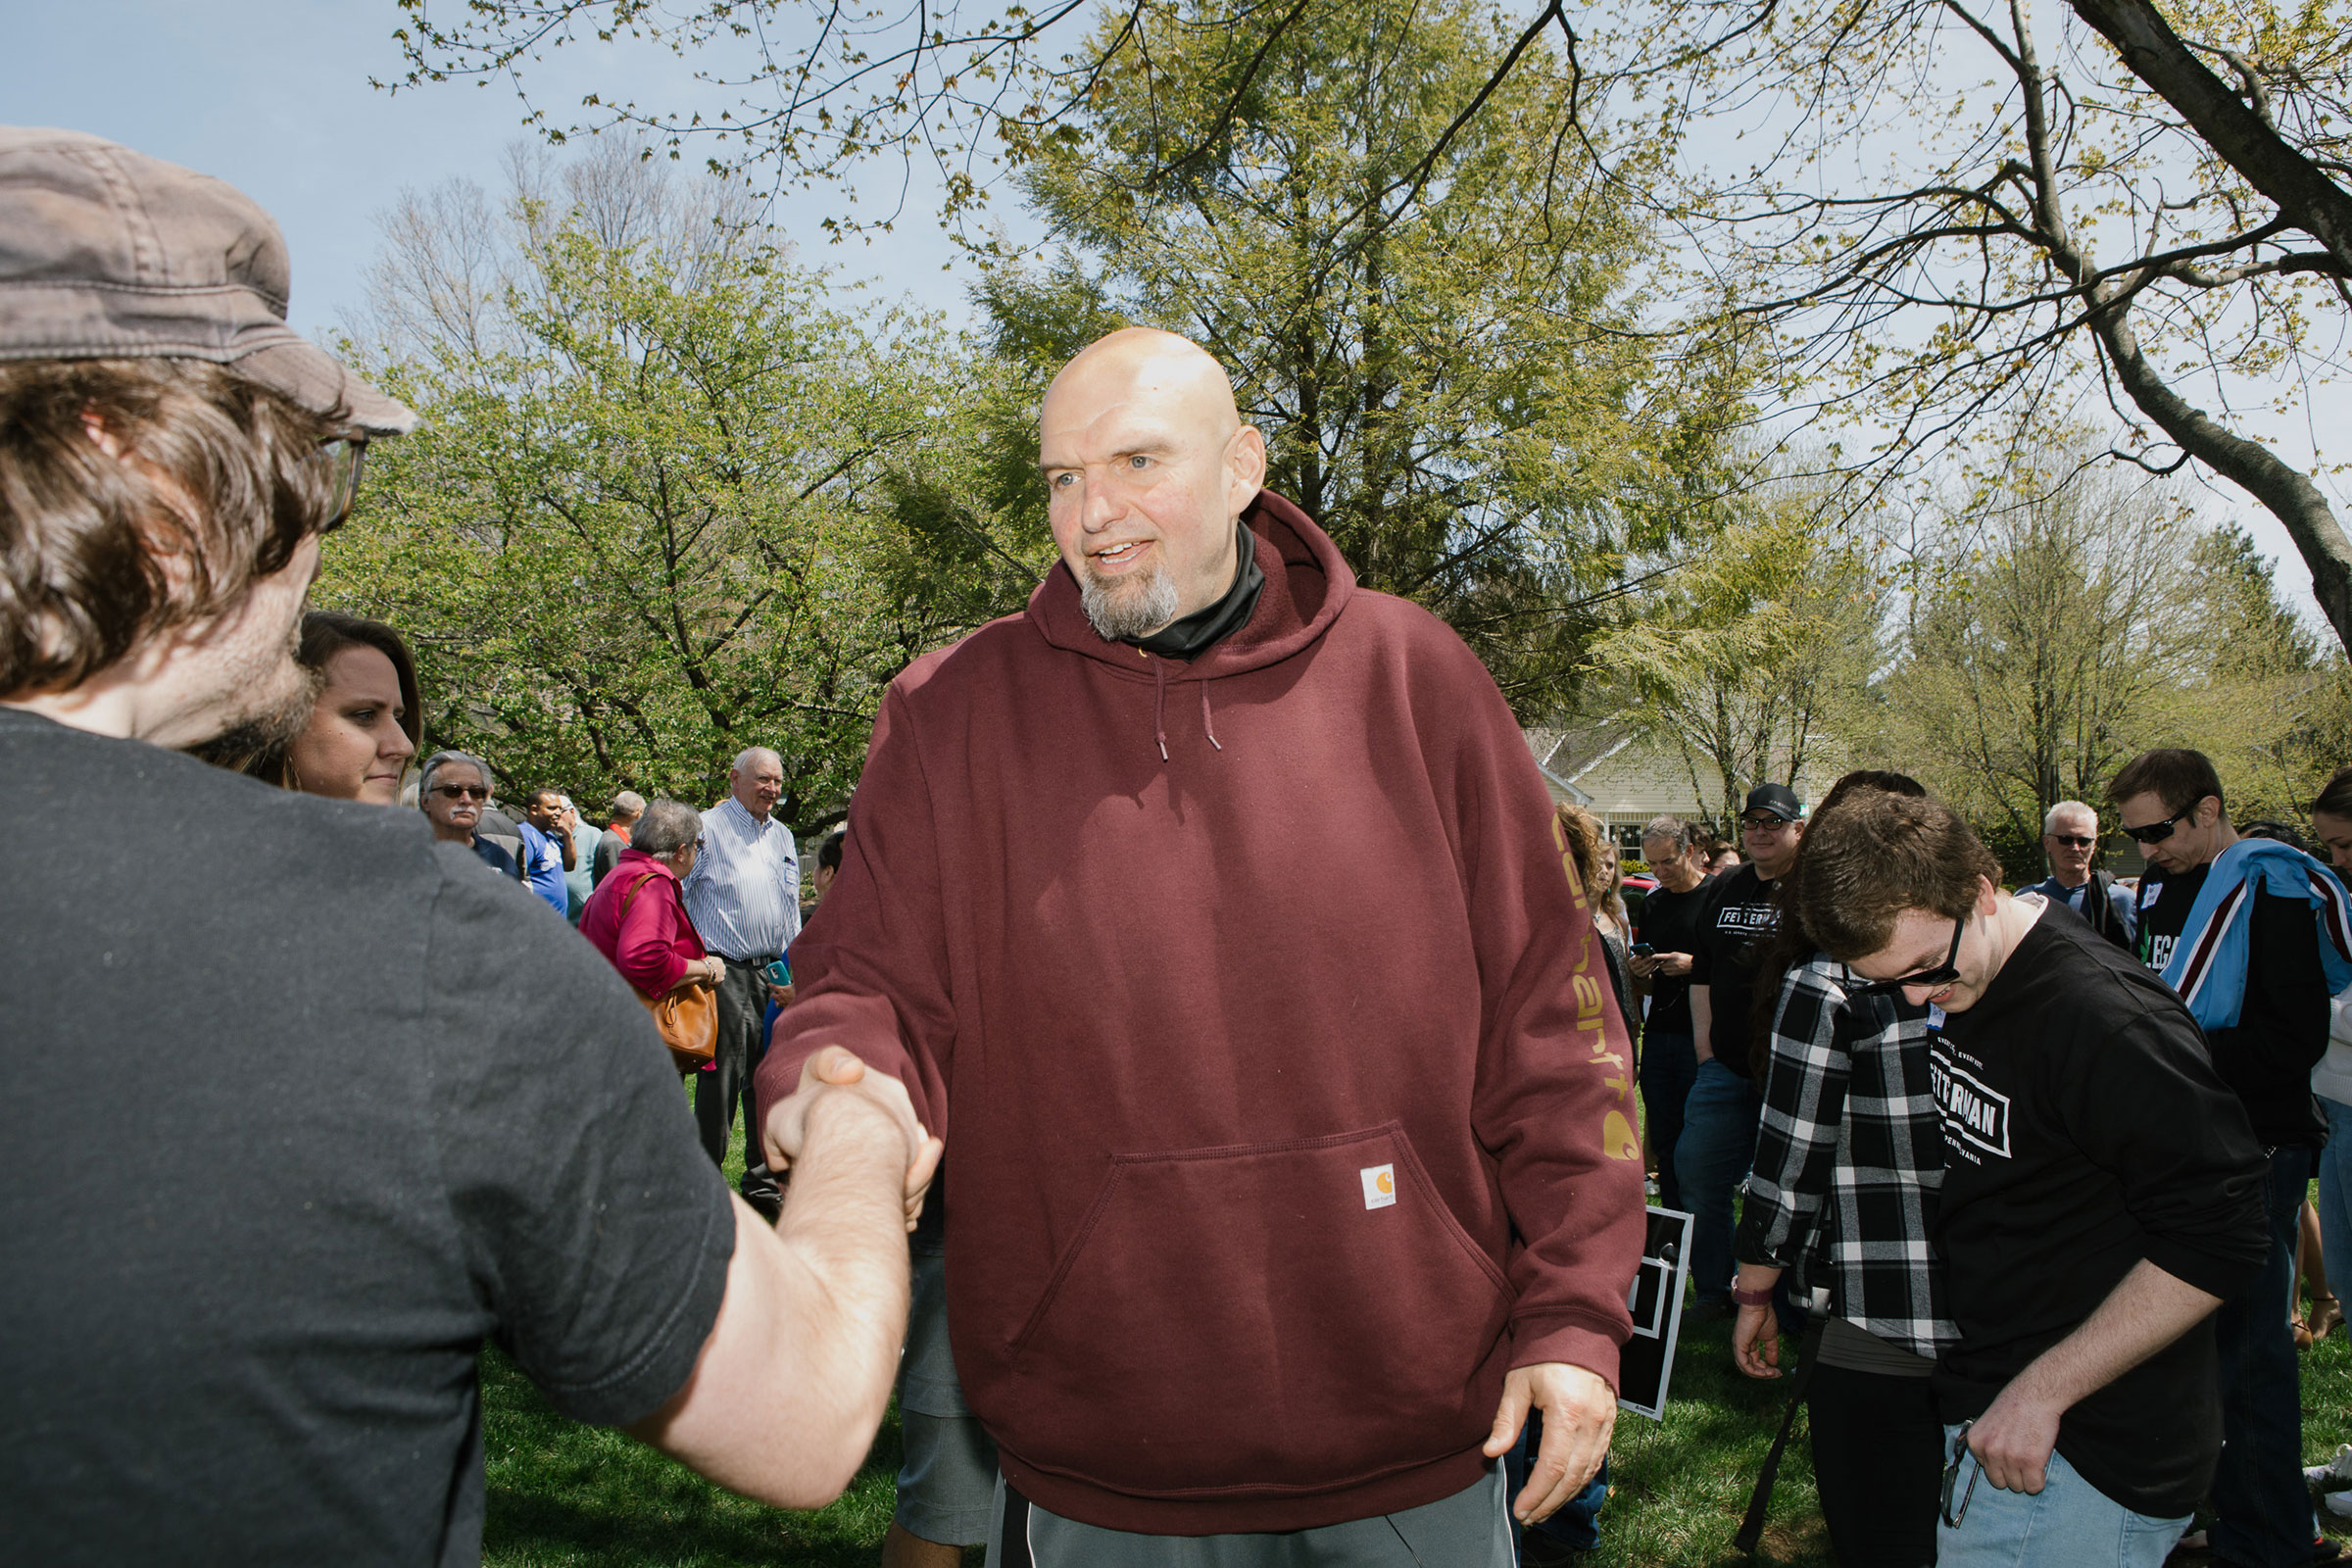 John Fetterman, lieutenant governor of Pennsylvania and a U.S. Senate candidate, greets an attendee during a campaign event in Lebanon, Pa., on April 30, 2022. (Michelle Gustafson—Bloomberg/Getty Images)